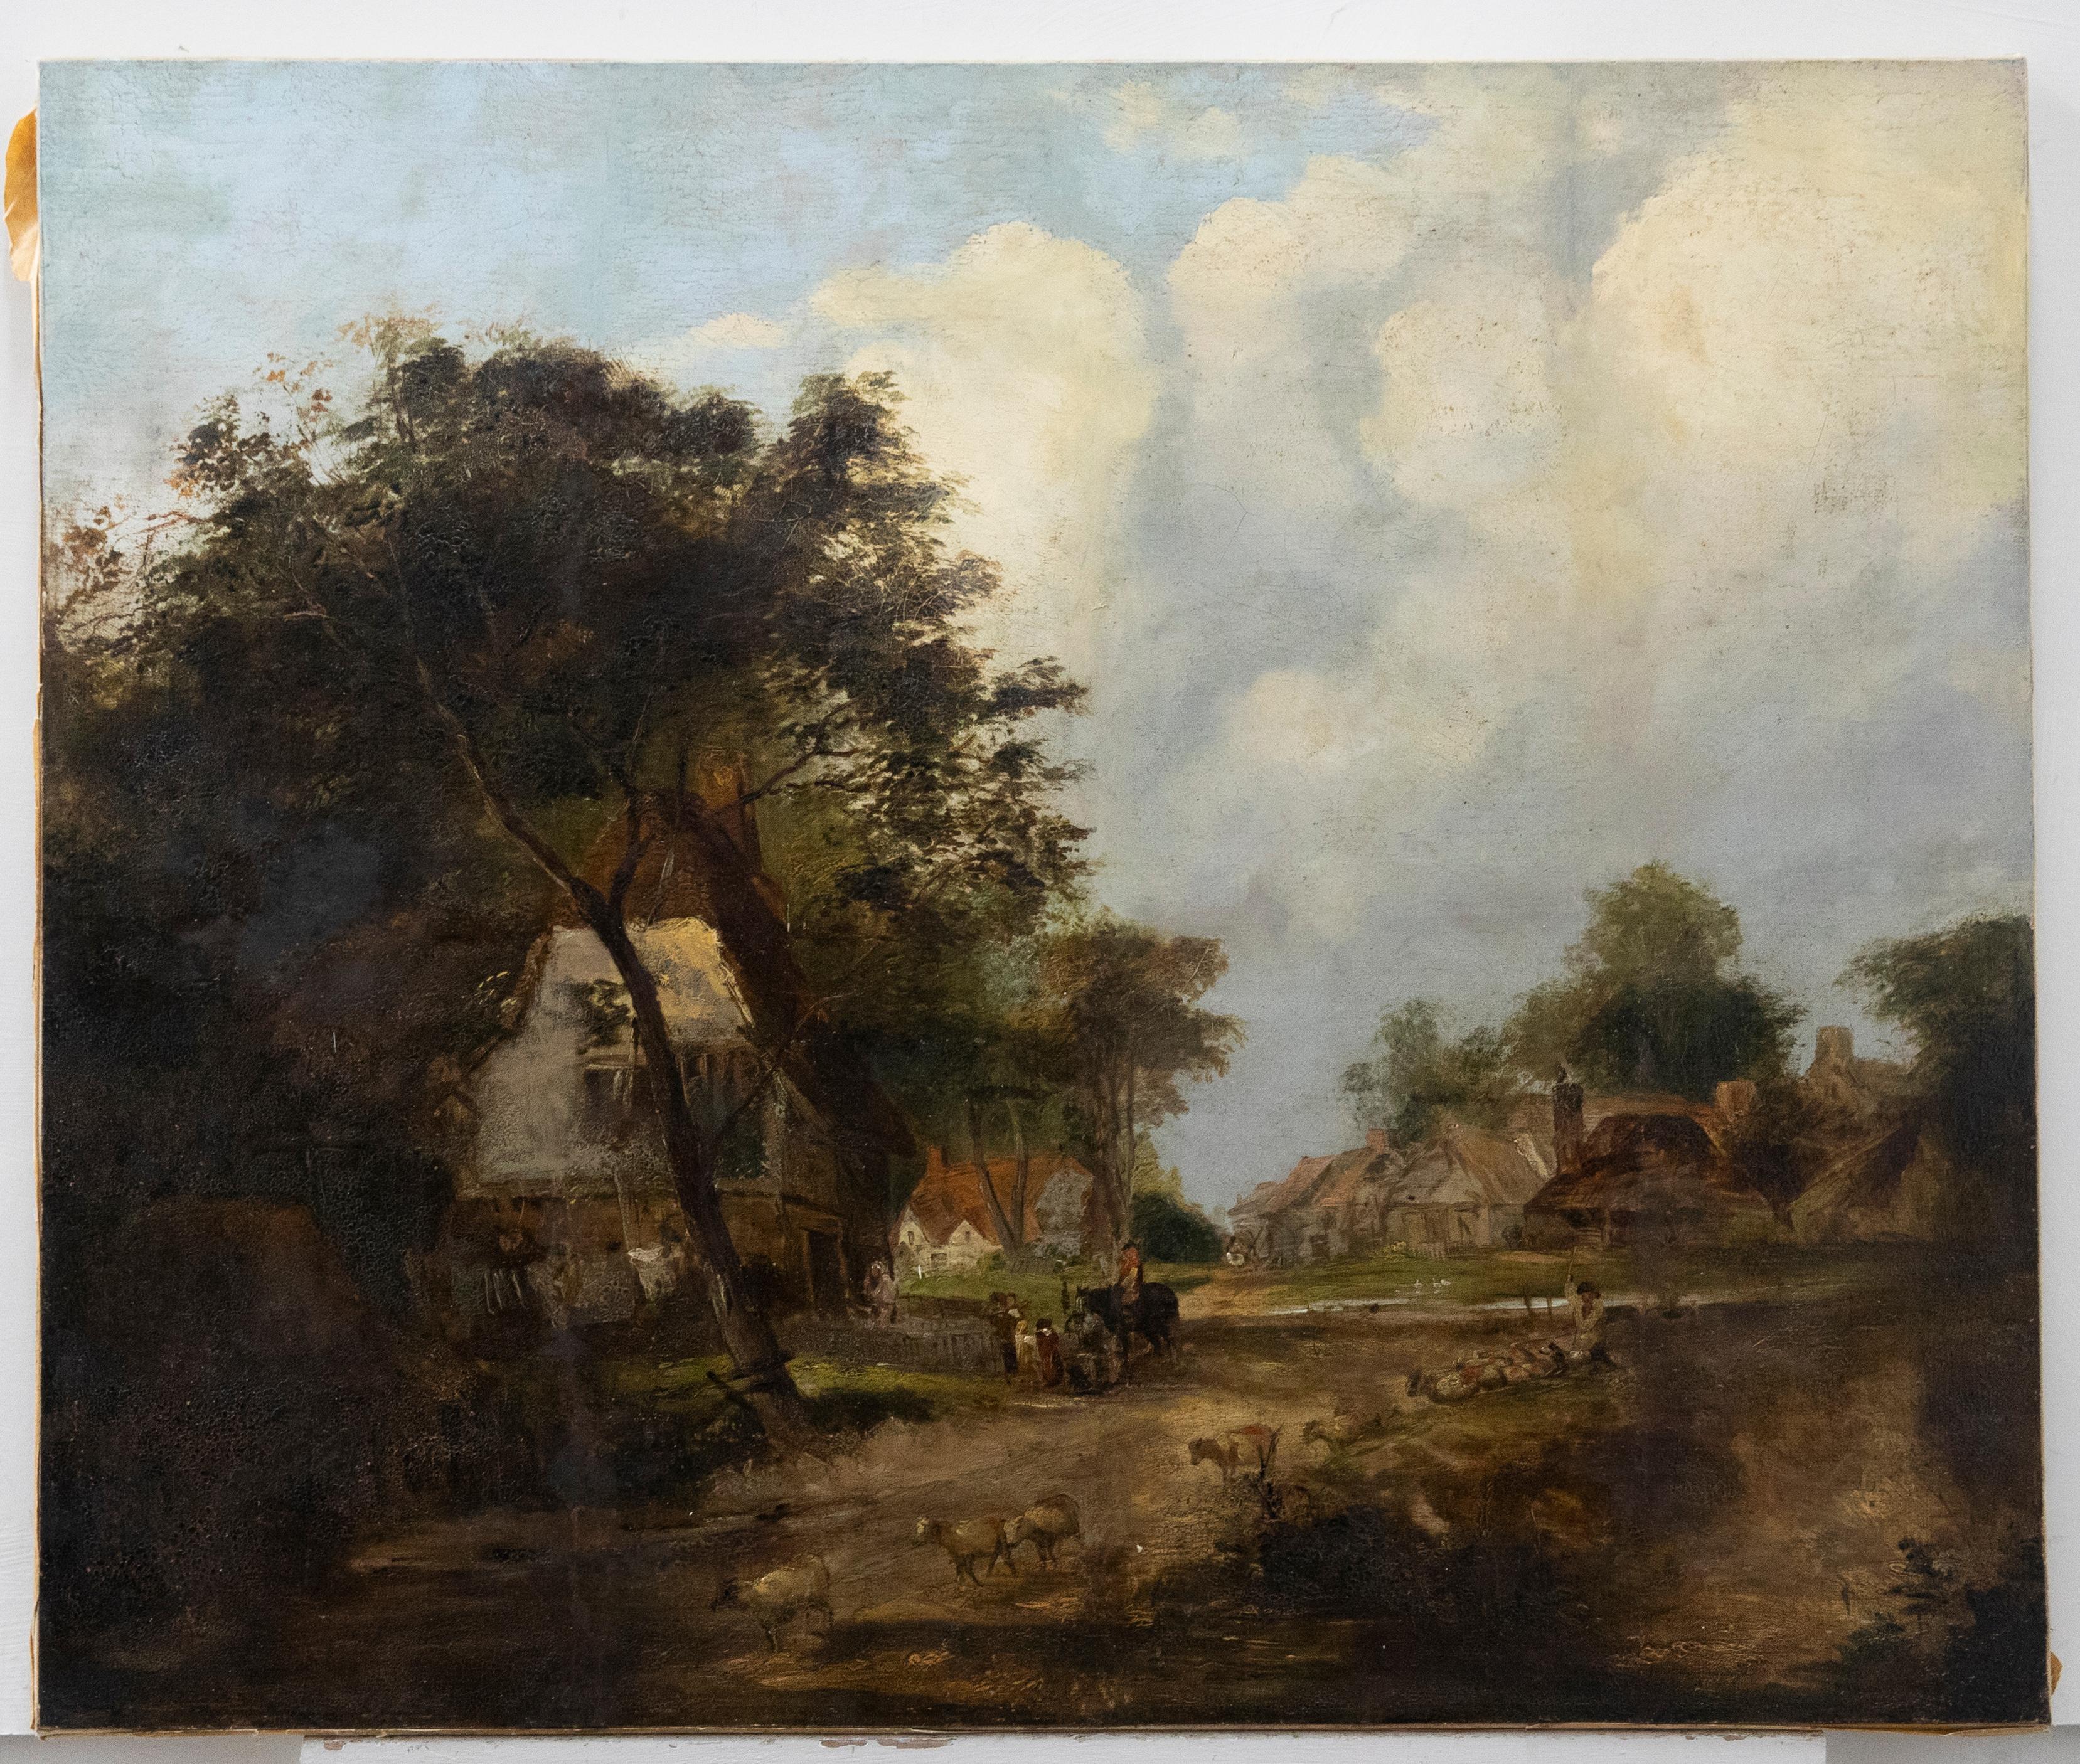 For Restoration 19th Century Oil - An English Village Idyll - Painting by Unknown